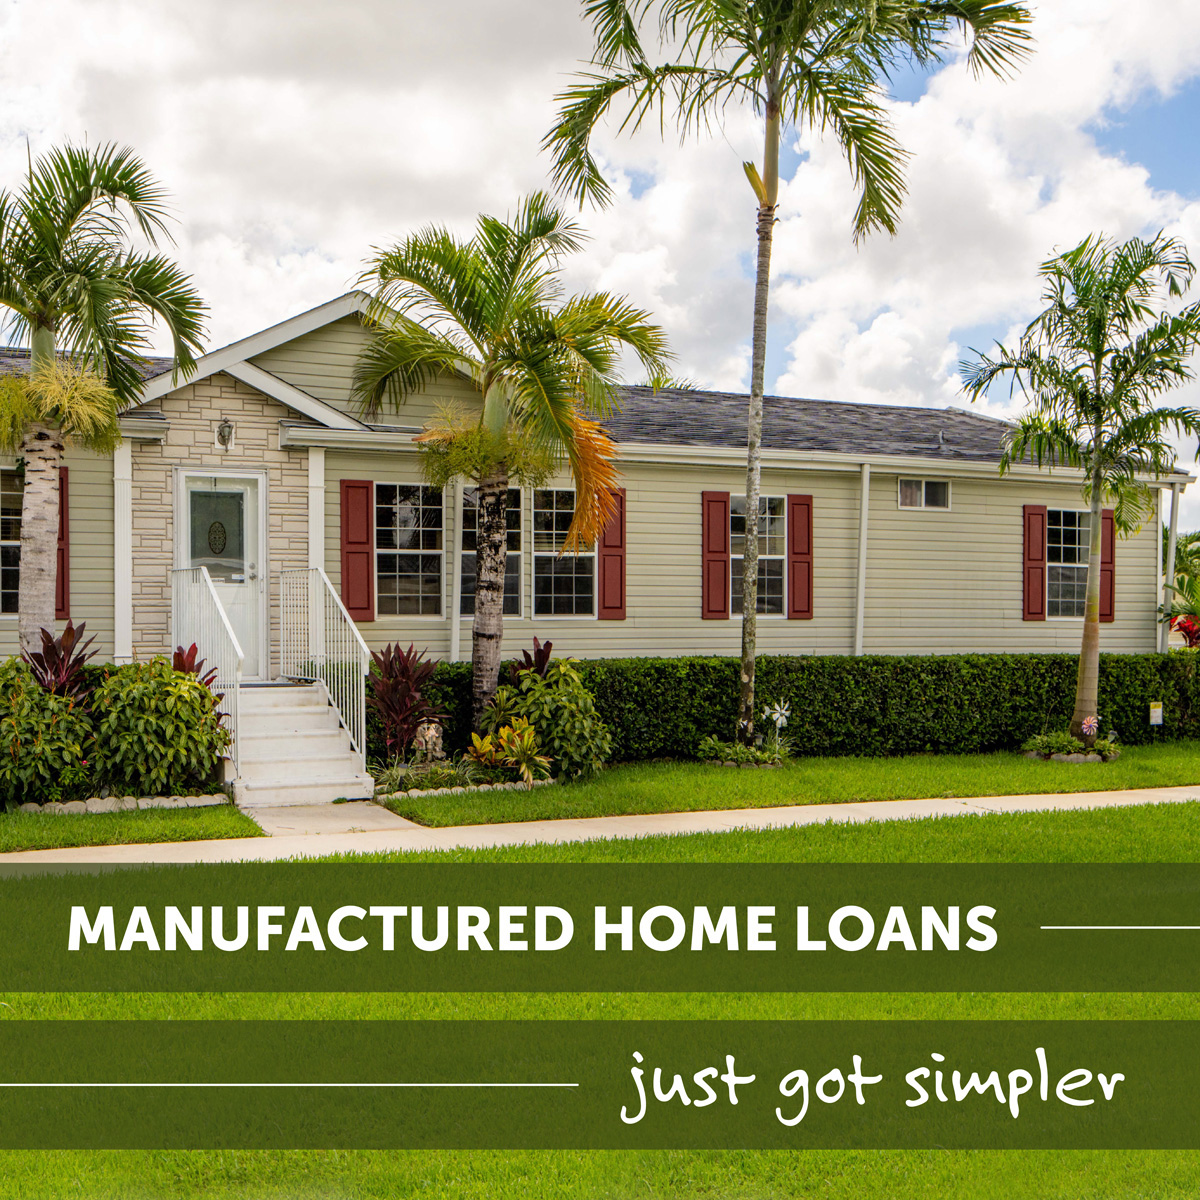 Choosing a manufactured home loan just got easier! 🏠 Get top-notch technology and service with regular and elite rates for conventional and government purchases and refinances! 📈🔑

🐺🐺🐺🐺
#Loanwolflending
#Mortgagebroker
#Homeloanswithabite
#Abetterbreedofhomeloans